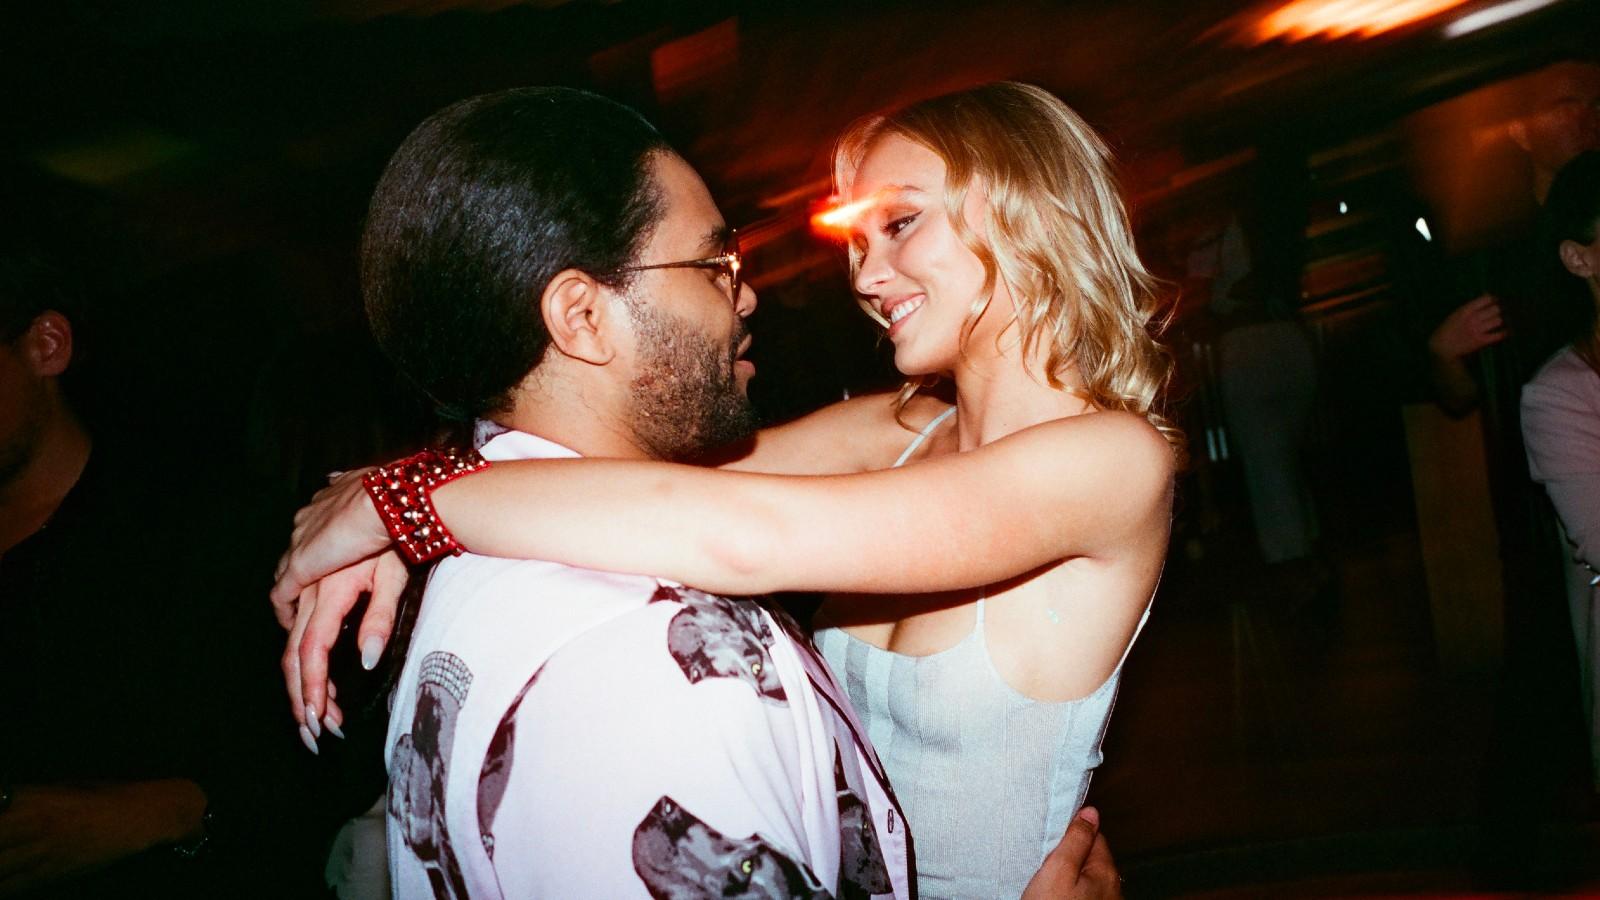 Lily-Rose Depp and The Weeknd in The Idol